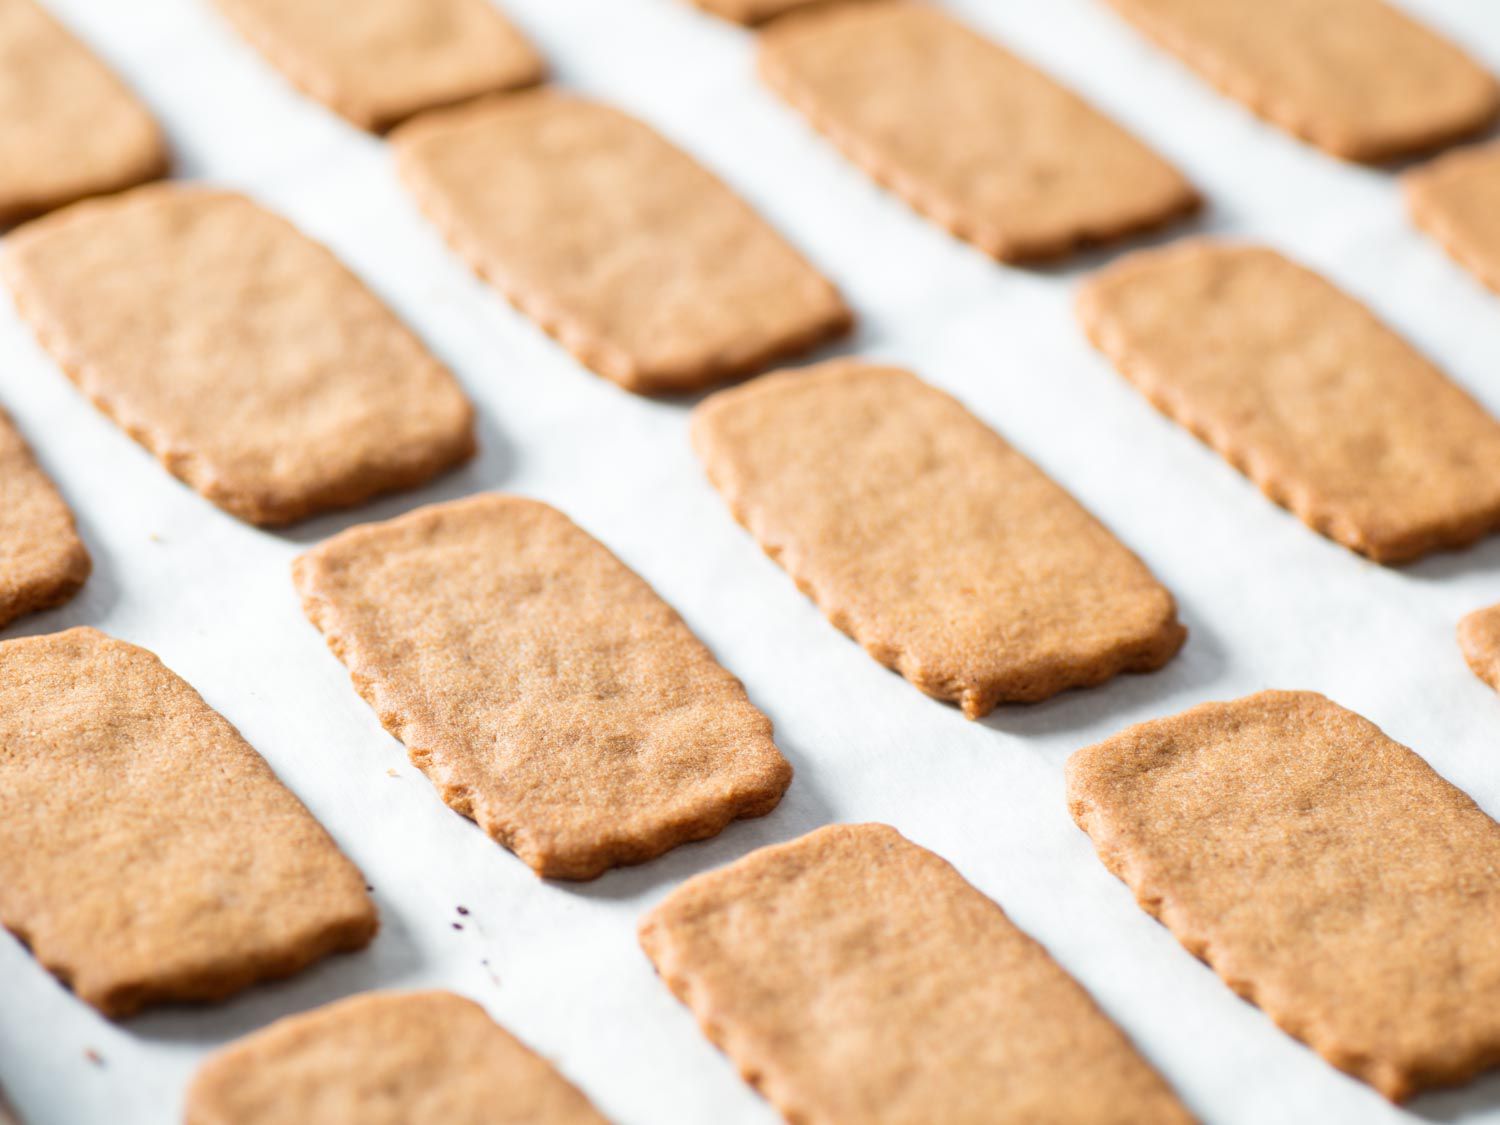 Baked Biscoff, or rectangular speculoos cookies, on a baking sheet lined with parchment paper.